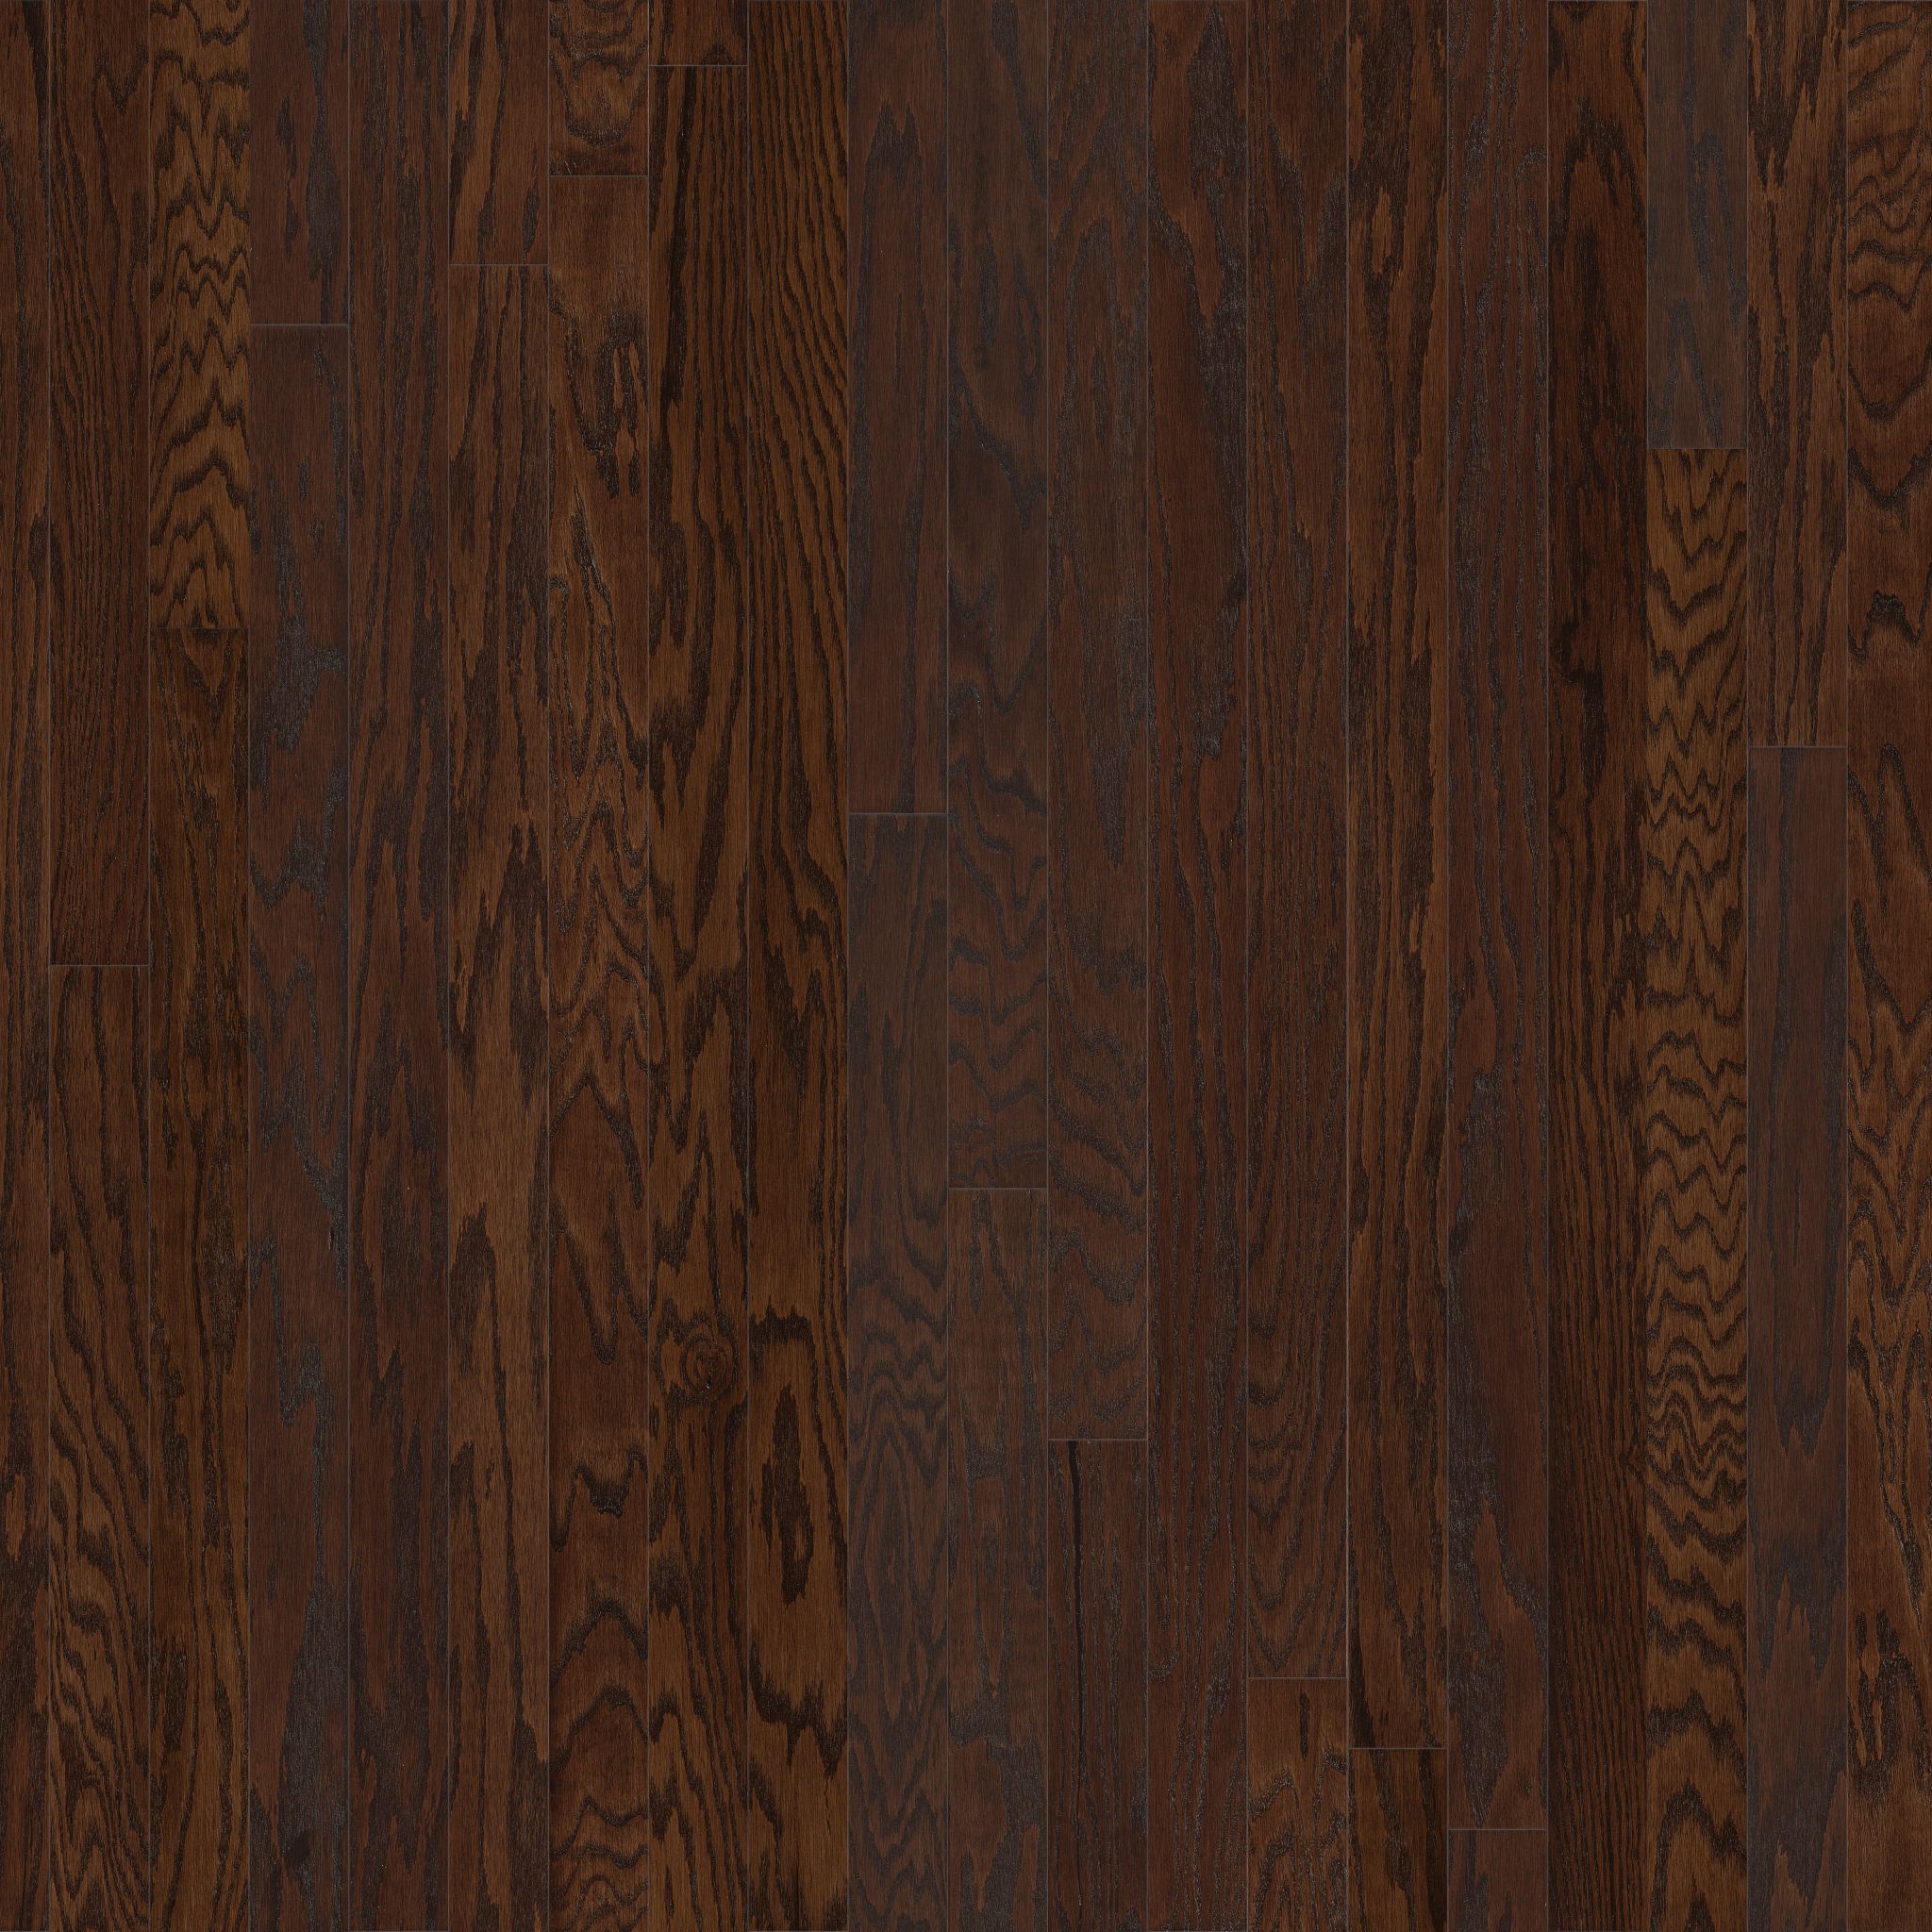 Style name and number: Albright Oak 3 1/4″ SW581 and color name and number: Coffee Bean 00938